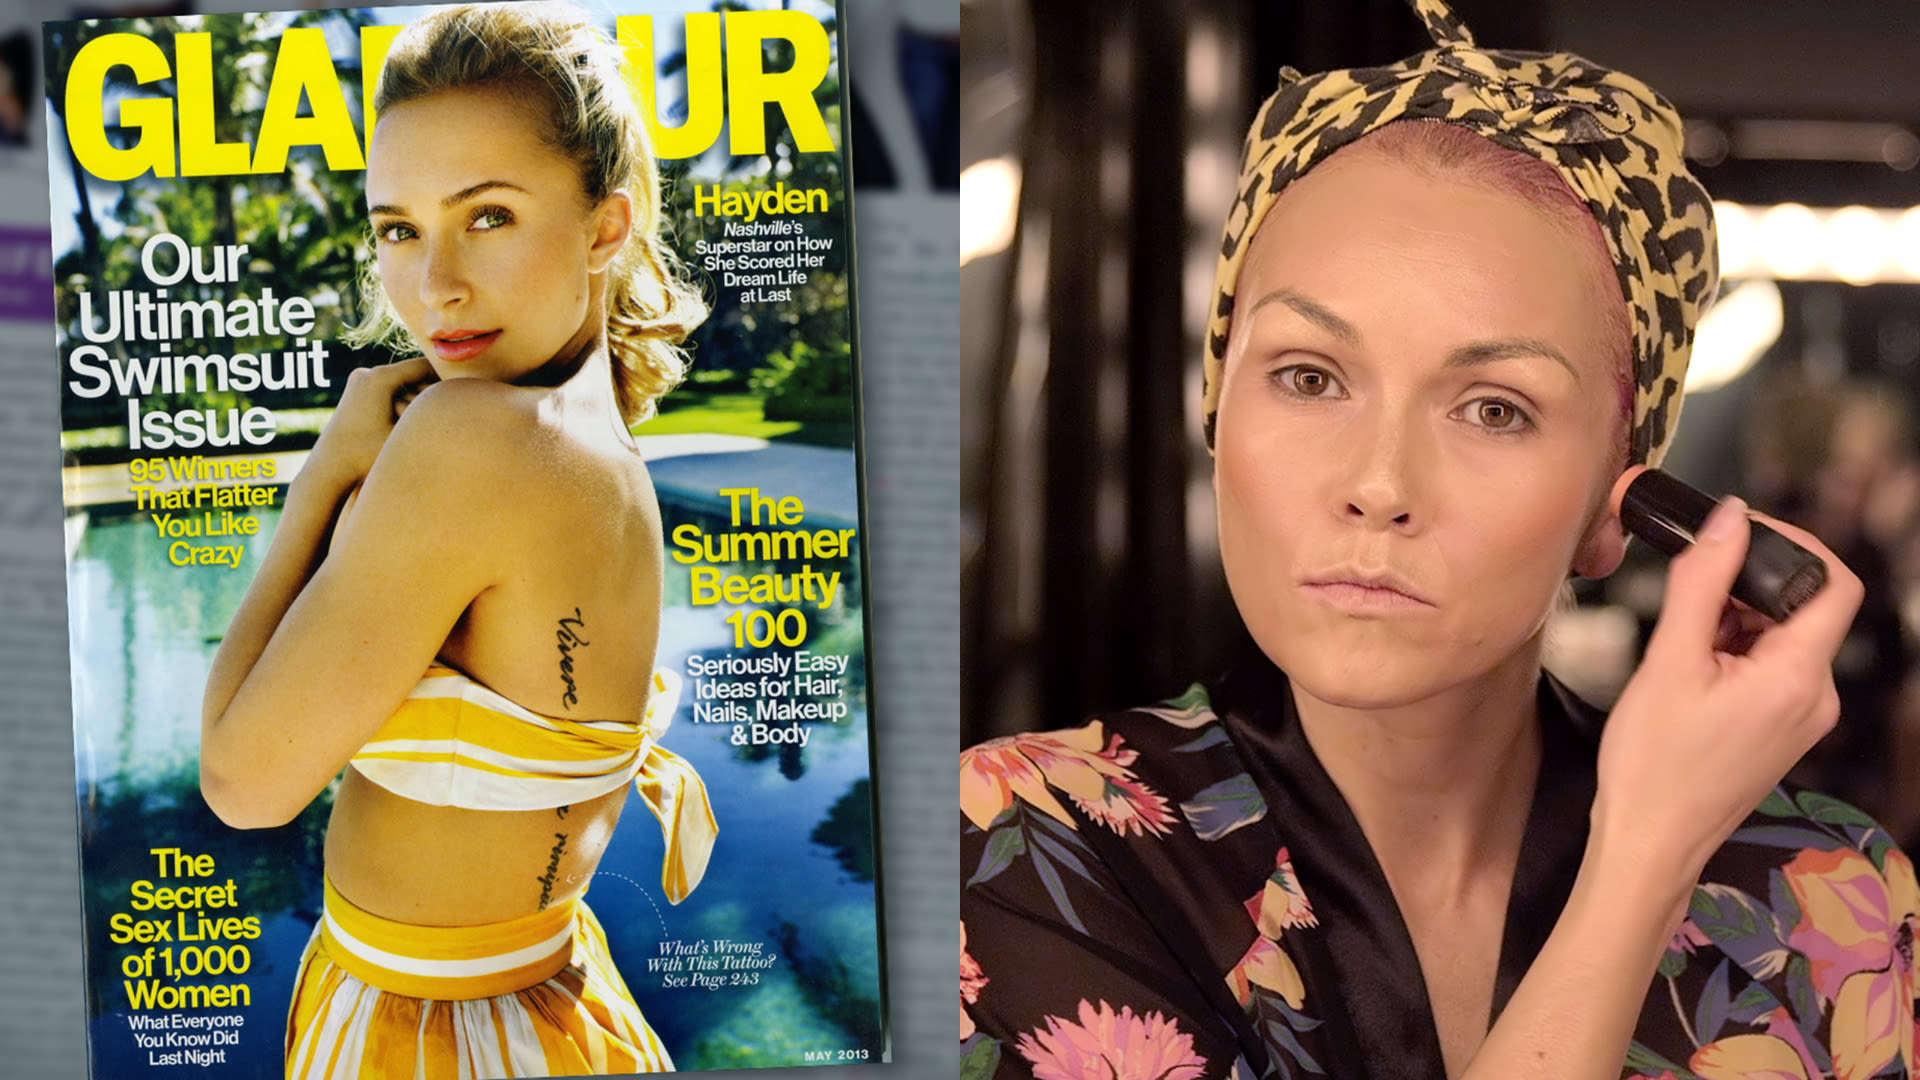 Watch Steal Hayden Panettieres Sun-Kissed Glow from her Glamour Cover Beauty ReCovered Glamour picture